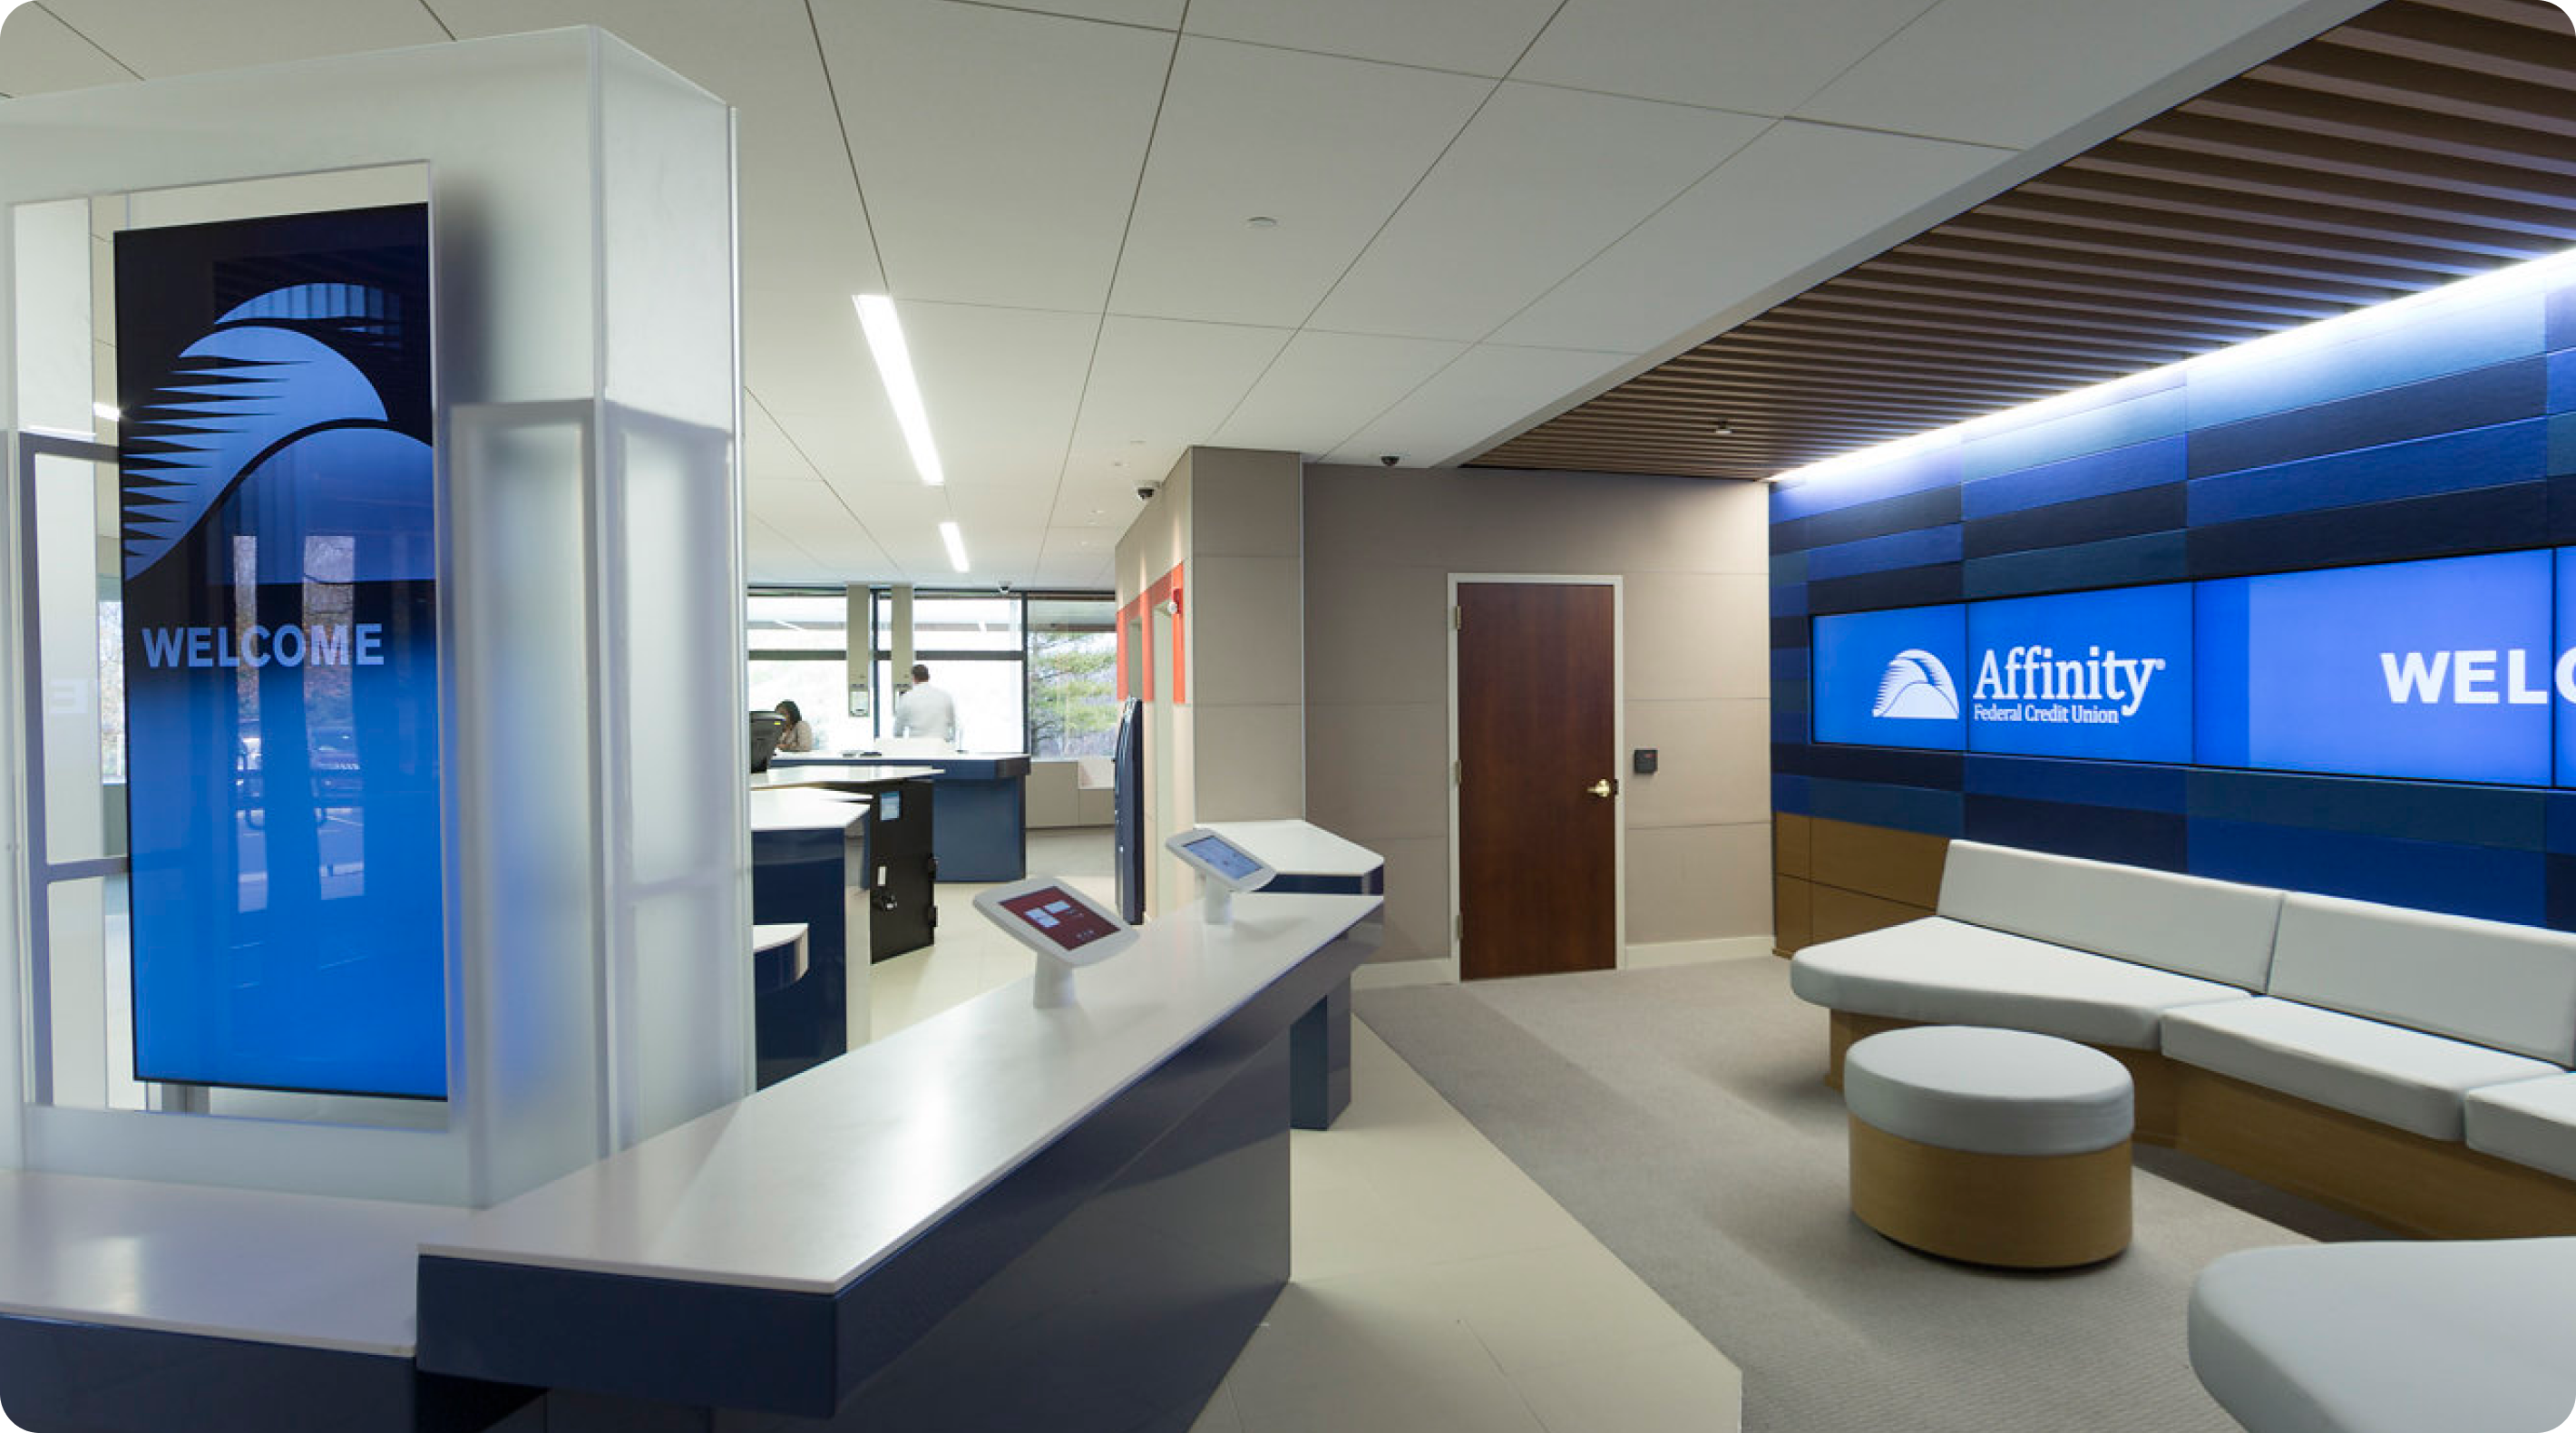 Inside of Affinity Federal Credit Union office